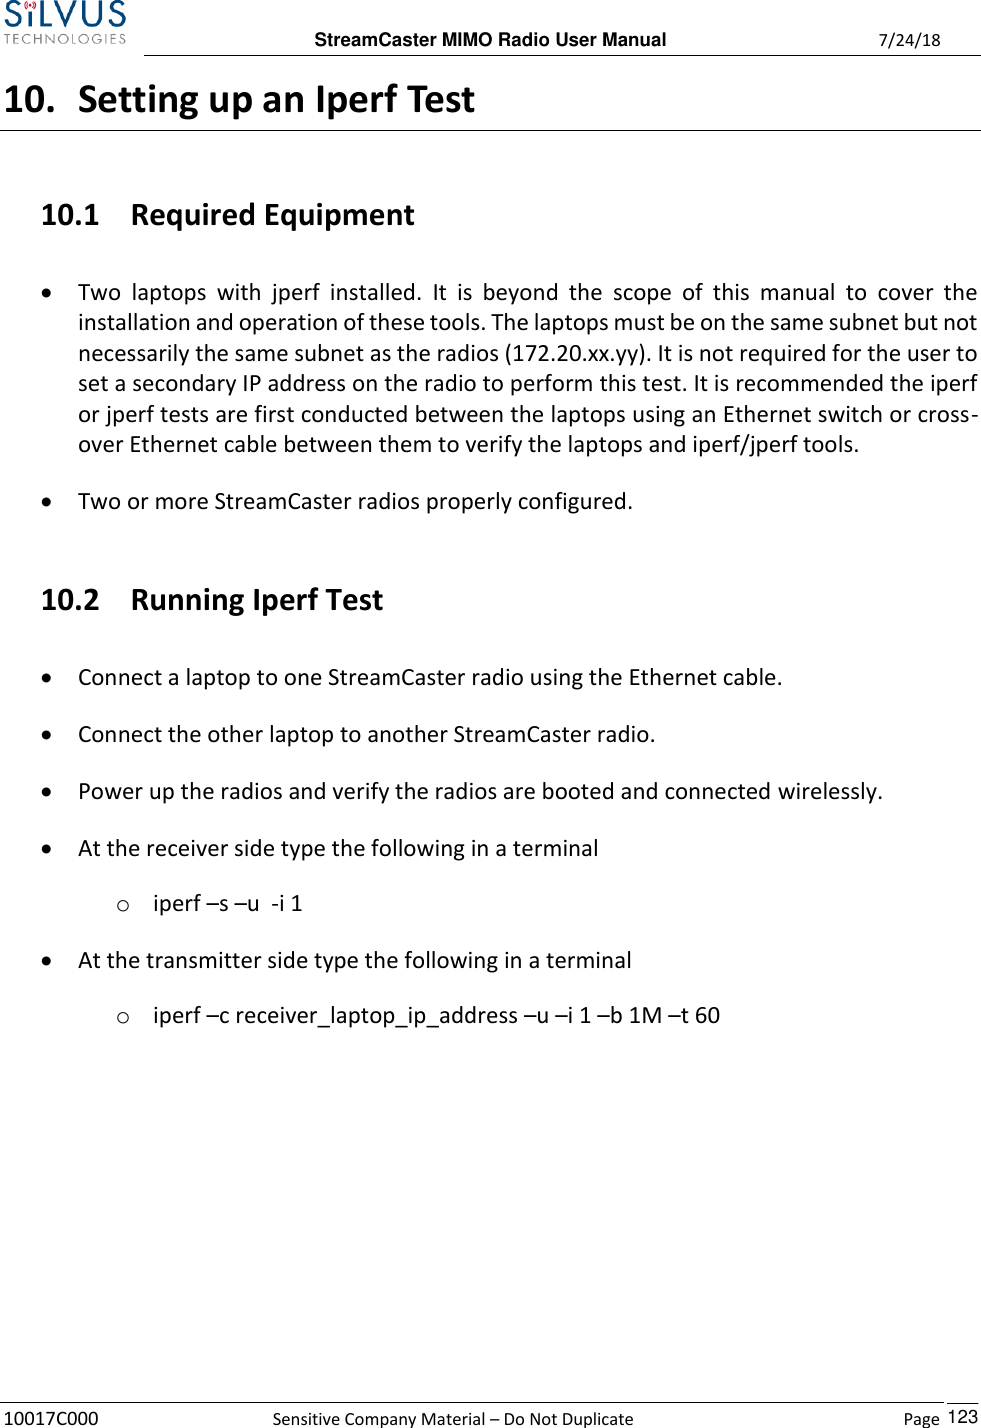  StreamCaster MIMO Radio User Manual  7/24/18 10017C000  Sensitive Company Material – Do Not Duplicate    Page    123 10. Setting up an Iperf Test 10.1 Required Equipment • Two  laptops  with  jperf  installed.  It  is  beyond  the  scope  of  this  manual  to  cover  the installation and operation of these tools. The laptops must be on the same subnet but not necessarily the same subnet as the radios (172.20.xx.yy). It is not required for the user to set a secondary IP address on the radio to perform this test. It is recommended the iperf or jperf tests are first conducted between the laptops using an Ethernet switch or cross-over Ethernet cable between them to verify the laptops and iperf/jperf tools. • Two or more StreamCaster radios properly configured.  10.2 Running Iperf Test • Connect a laptop to one StreamCaster radio using the Ethernet cable. • Connect the other laptop to another StreamCaster radio. • Power up the radios and verify the radios are booted and connected wirelessly. • At the receiver side type the following in a terminal o iperf –s –u  -i 1 • At the transmitter side type the following in a terminal o iperf –c receiver_laptop_ip_address –u –i 1 –b 1M –t 60       